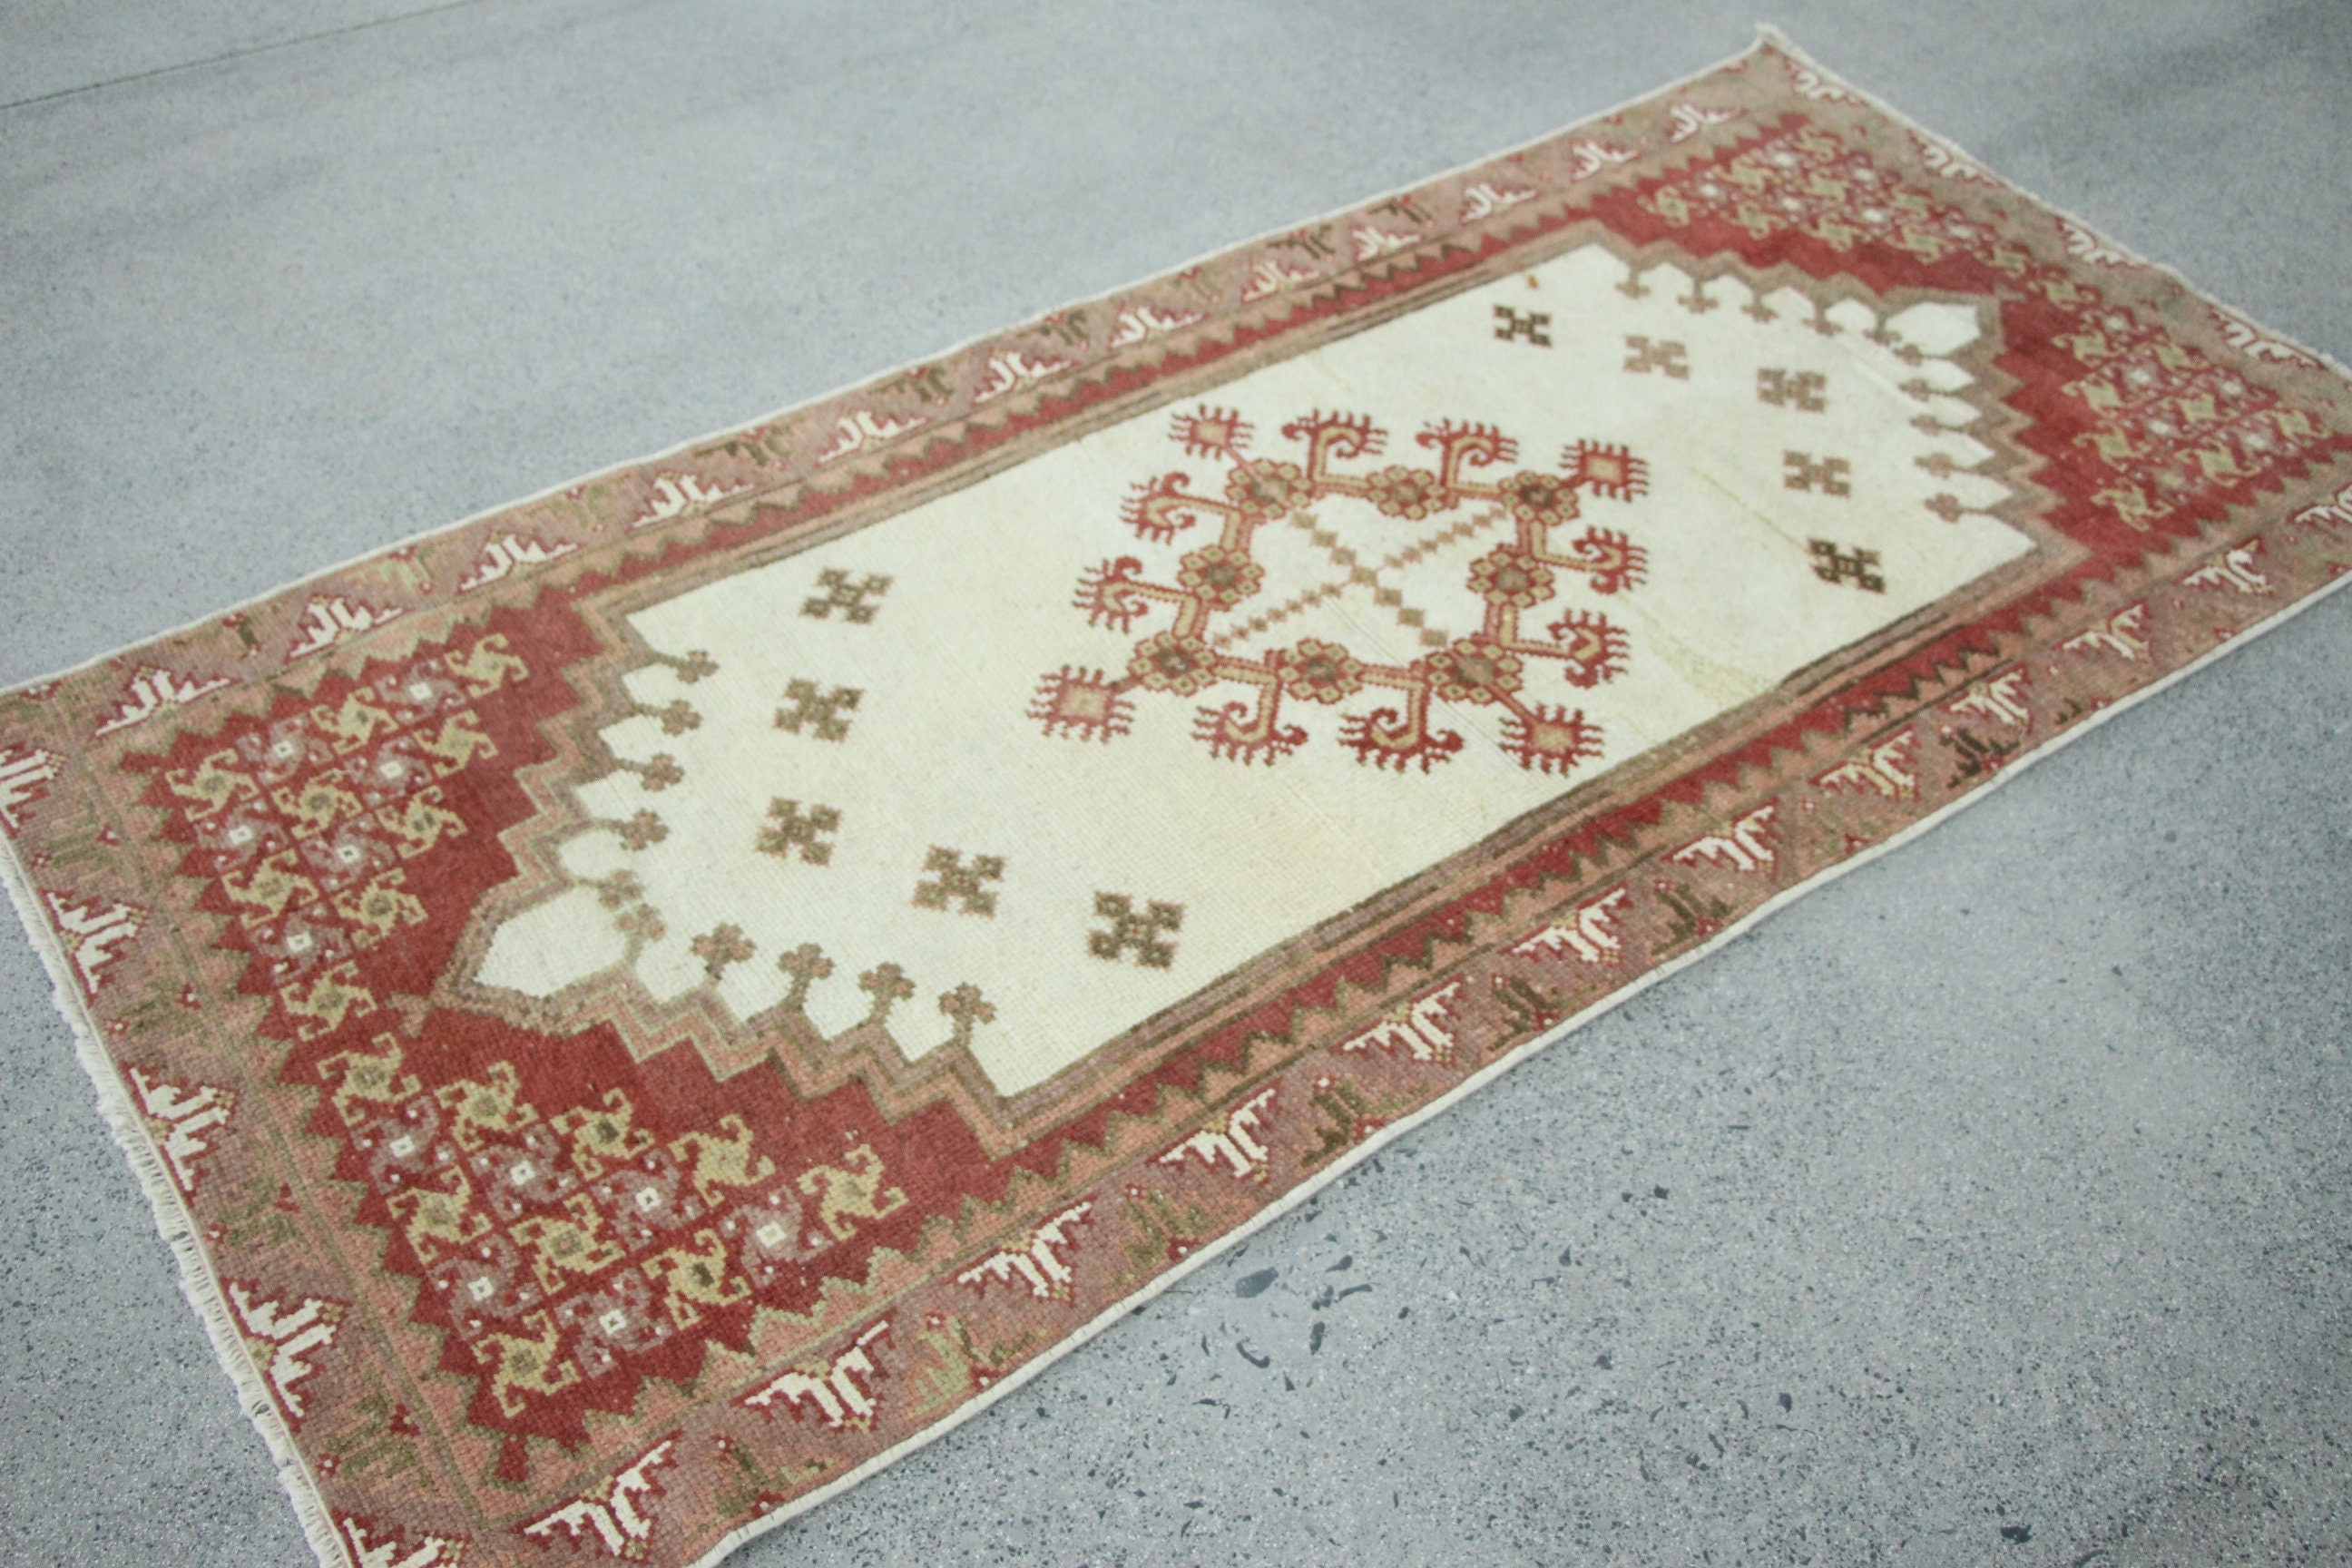 Cool Rug, Vintage Rug, Nursery Rug, Rugs for Bedroom, Entry Rugs, Turkish Rug, Home Decor Rug, White  2.9x6 ft Accent Rugs